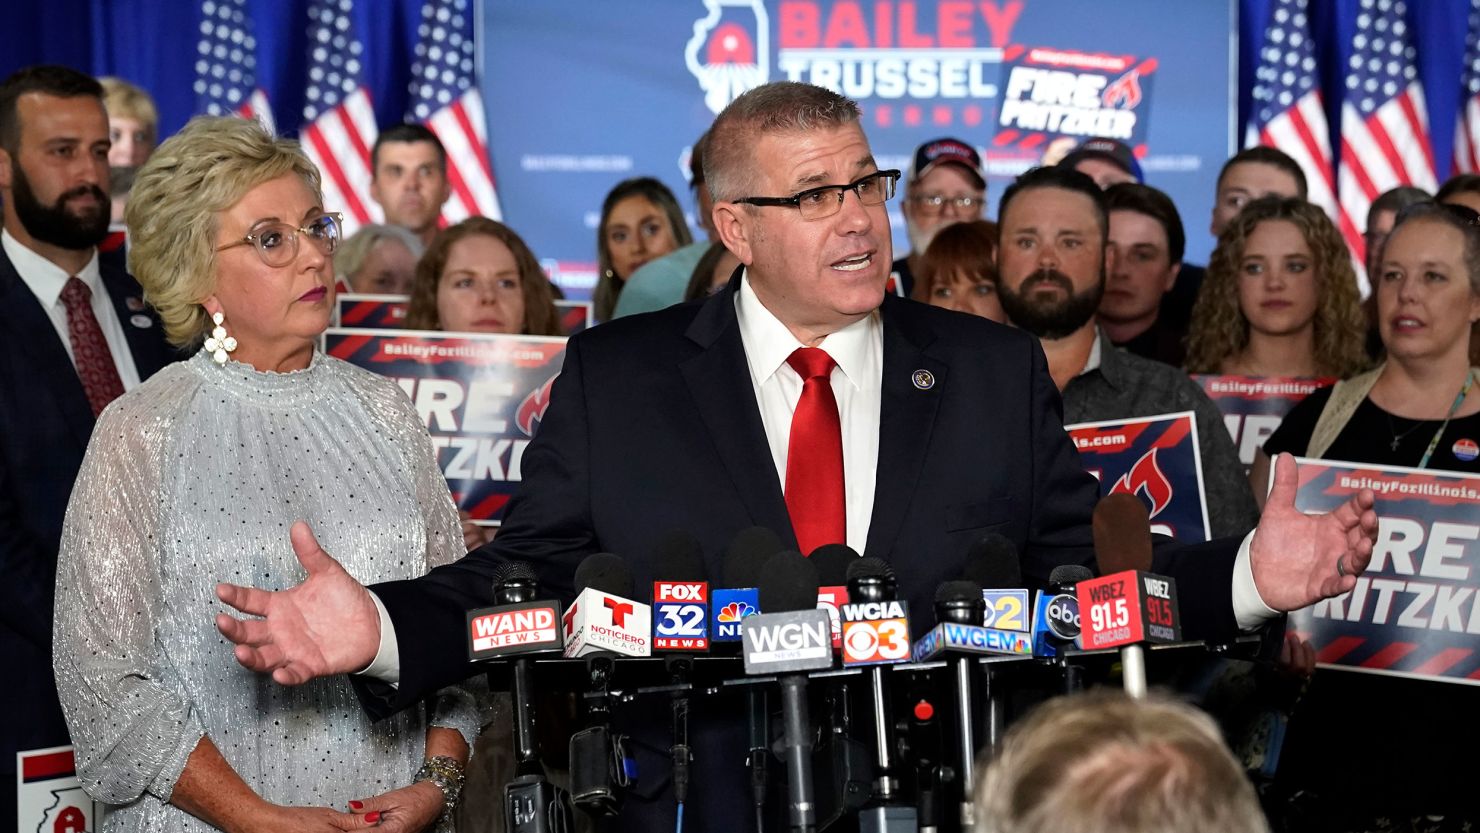 Republican gubernatorial primary candidate Darren Bailey, center, stands with his wife, Cindy Stortzum, and responds to reporters' questions after winning the Republican gubernatorial primary, Tuesday, June 28, 2022, in Effingham, Ill. Bailey will now face Democratic Gov. J.B. Pritzker in the fall. 